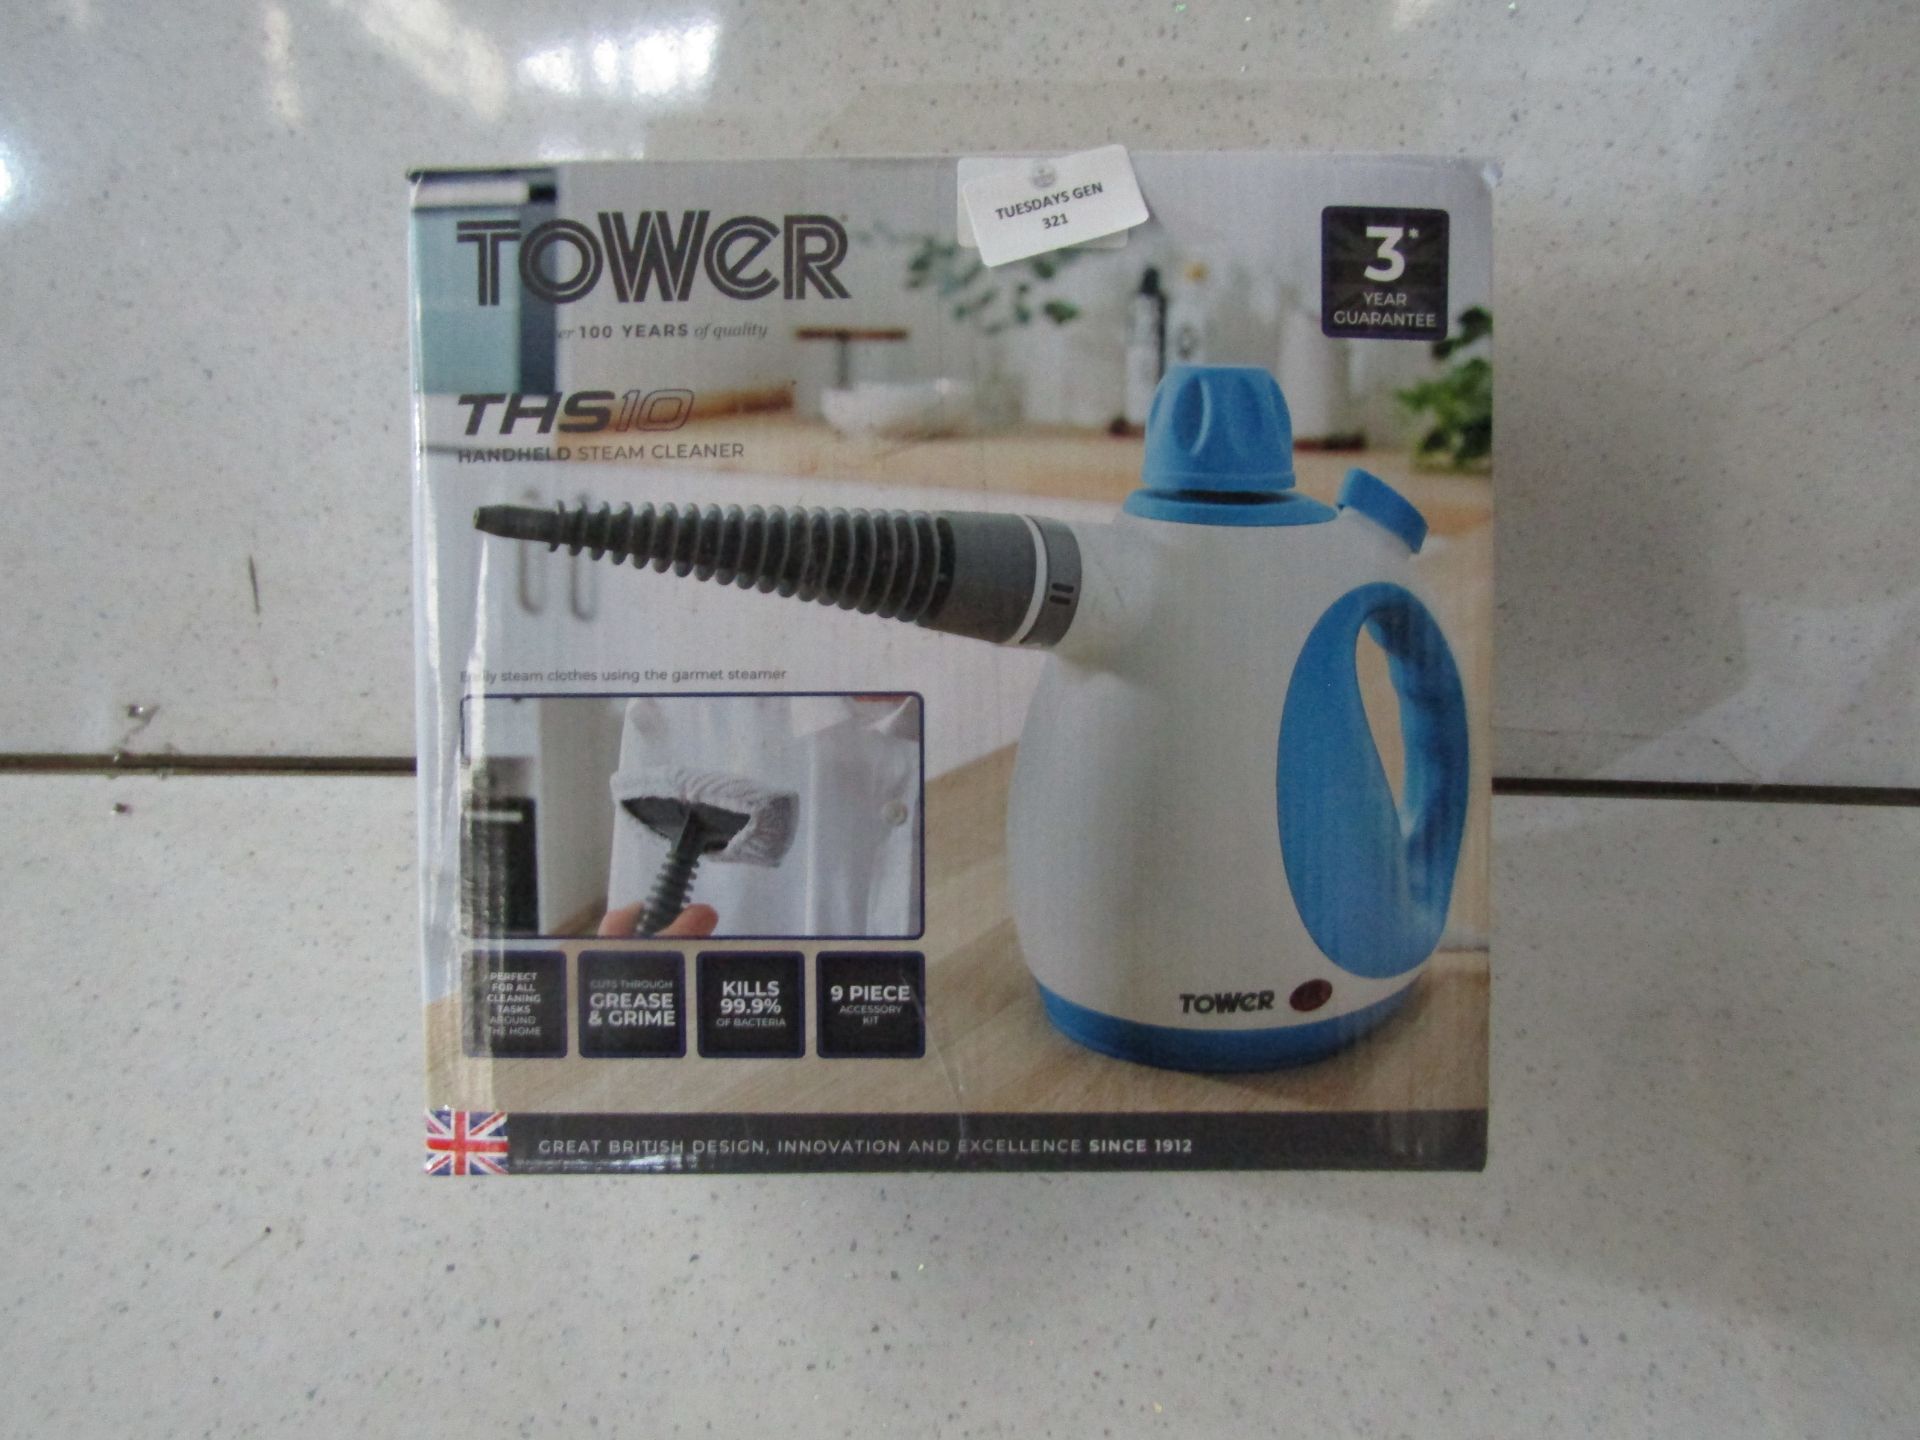 Tower - THS10 Handheld Steam Cleaner - Untested & Boxed.